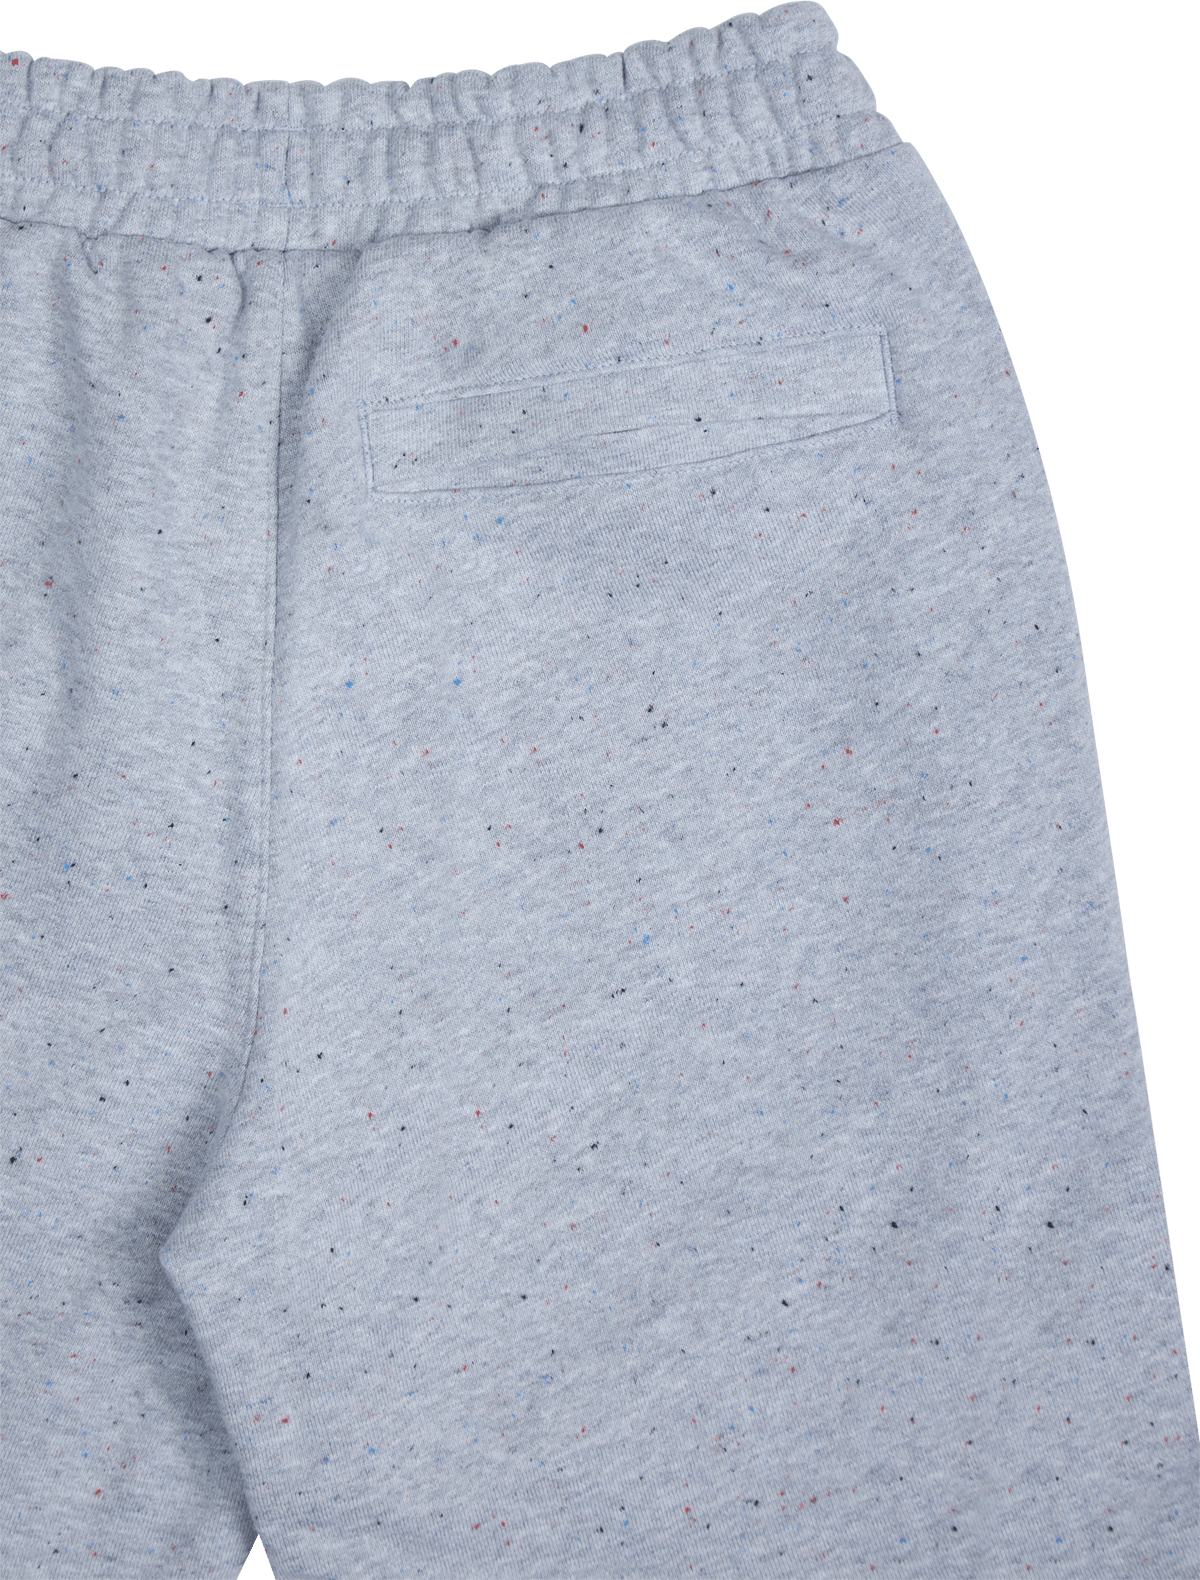 Re:collection Classics Shorts